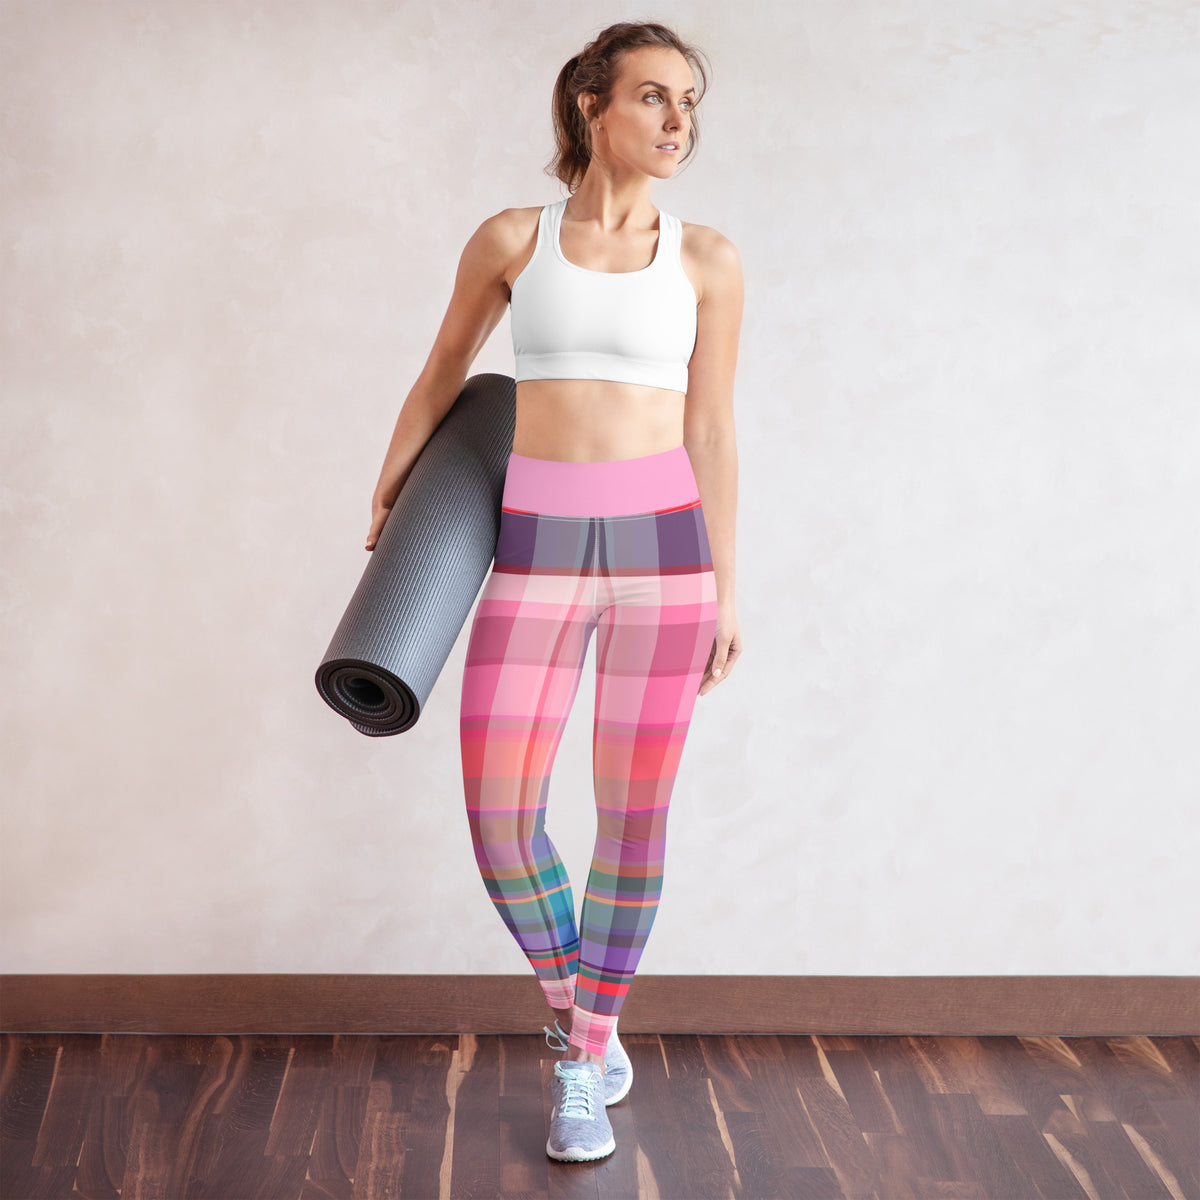 Colorful Fiesta Fiesta Yoga Leggings, infusing your workout with the energy of a vibrant celebration.